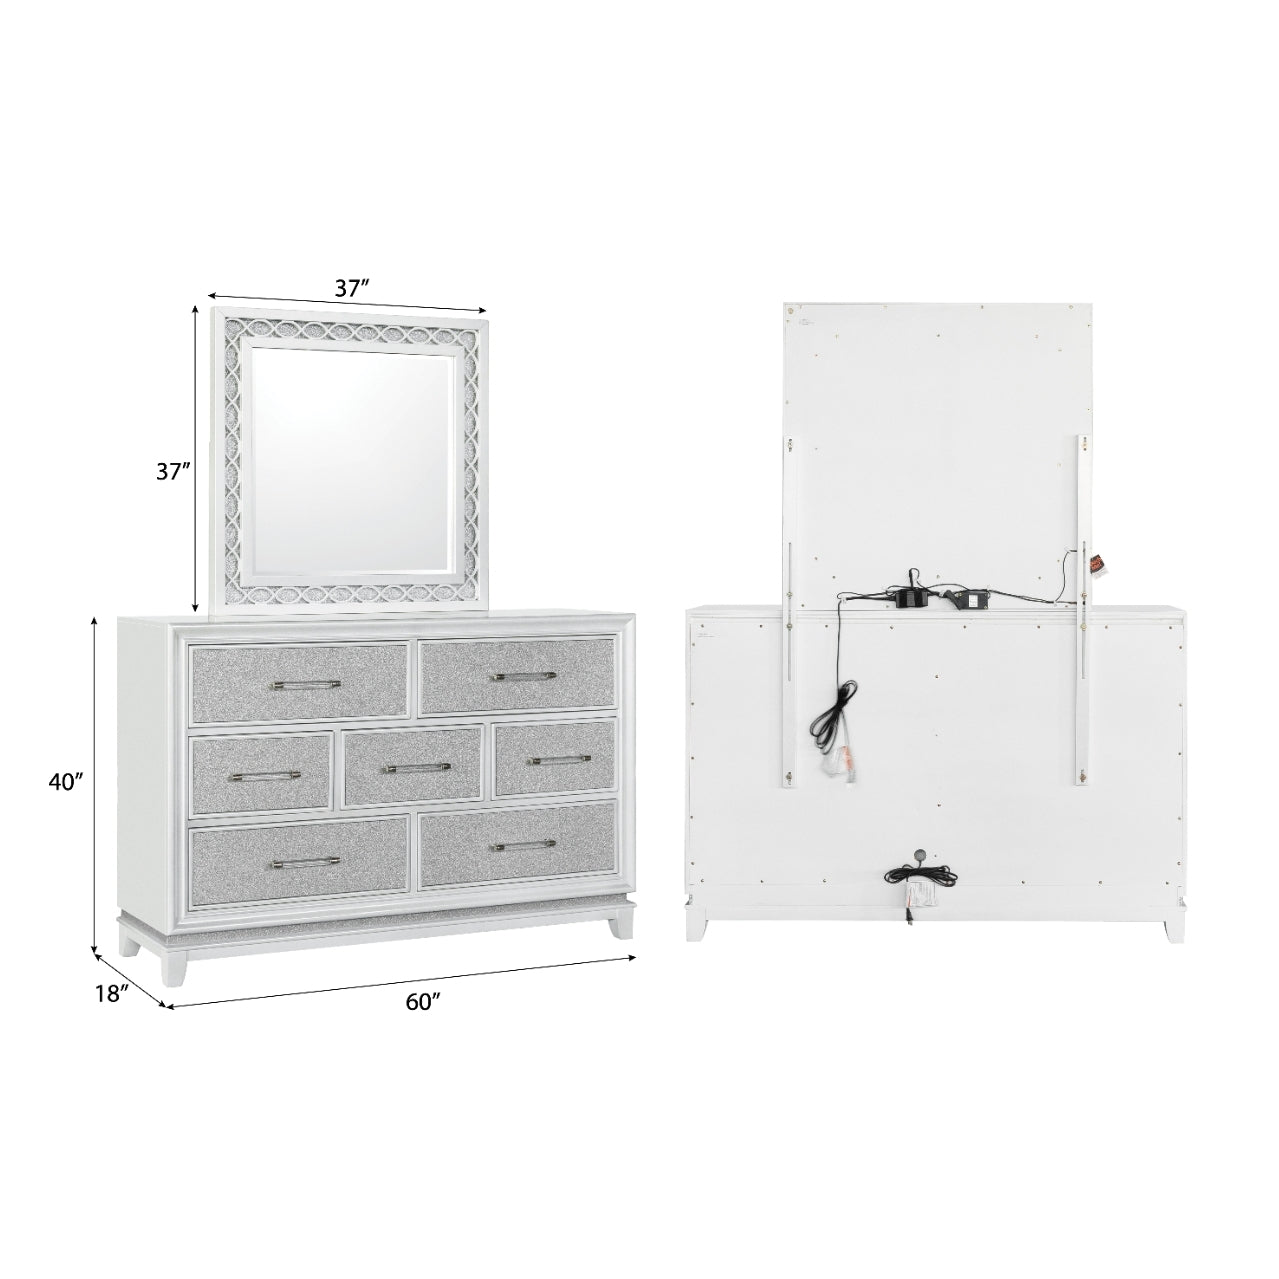 Galaxy 7-Drawer Bedroom Dresser with Mirror, With LED Lights, Pearlized White